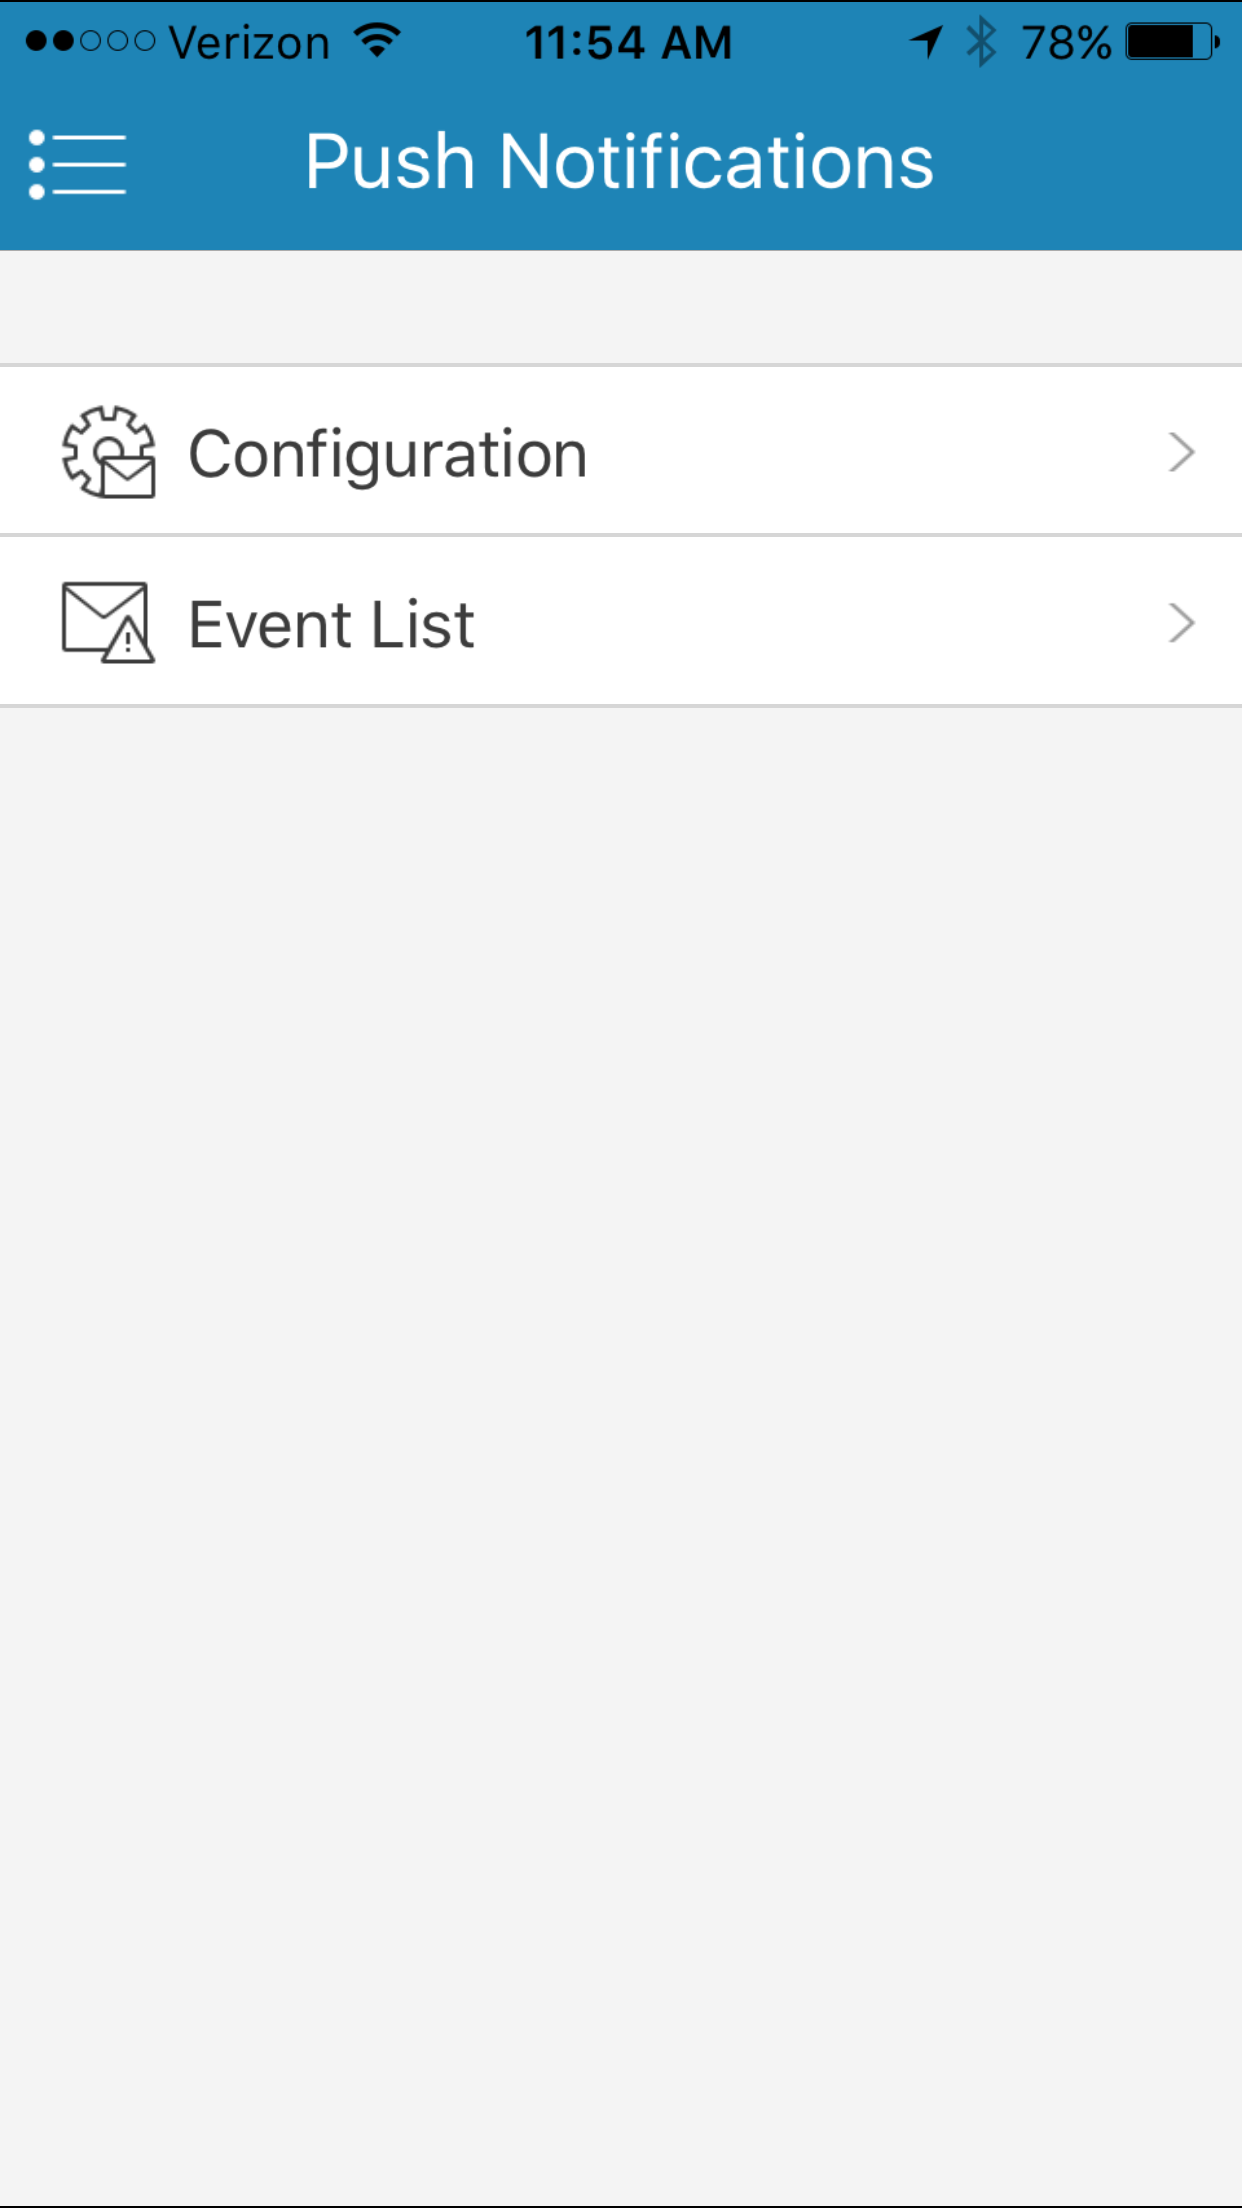 I click on the Event List